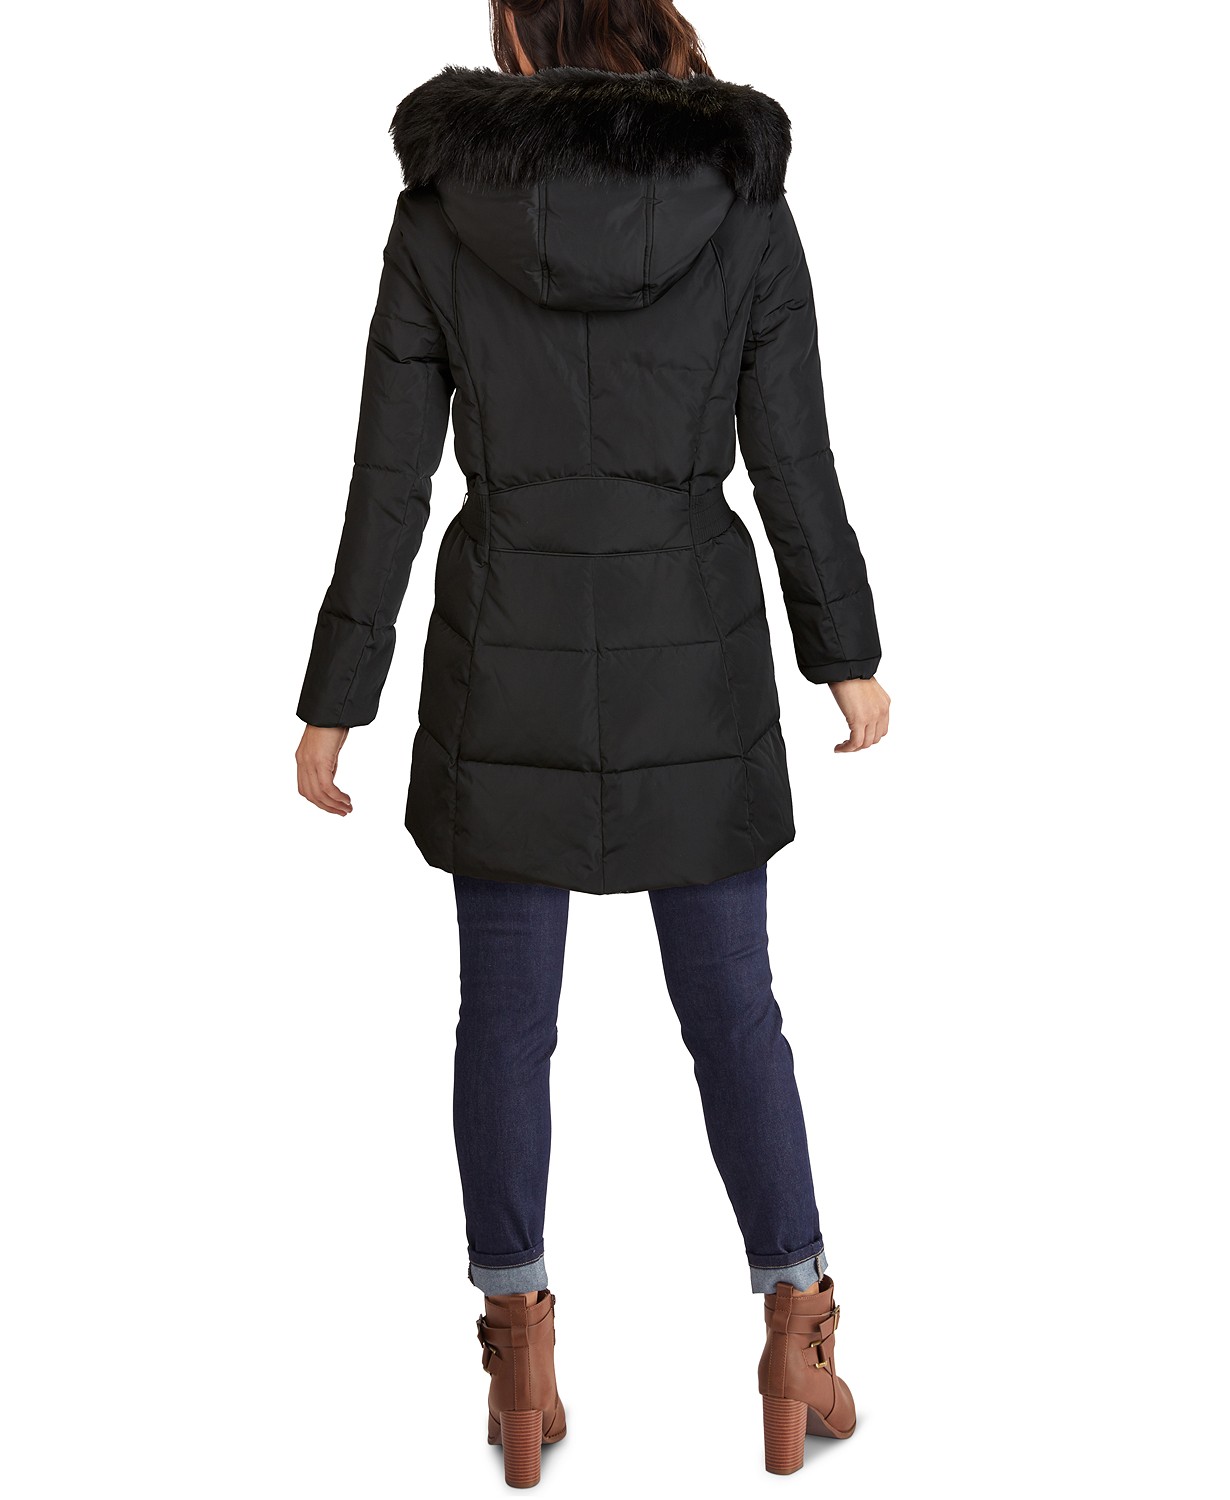 www.couturepoint.com-cole-haan-womens-black-faux-fur-trim-hooded-down-puffer-coat